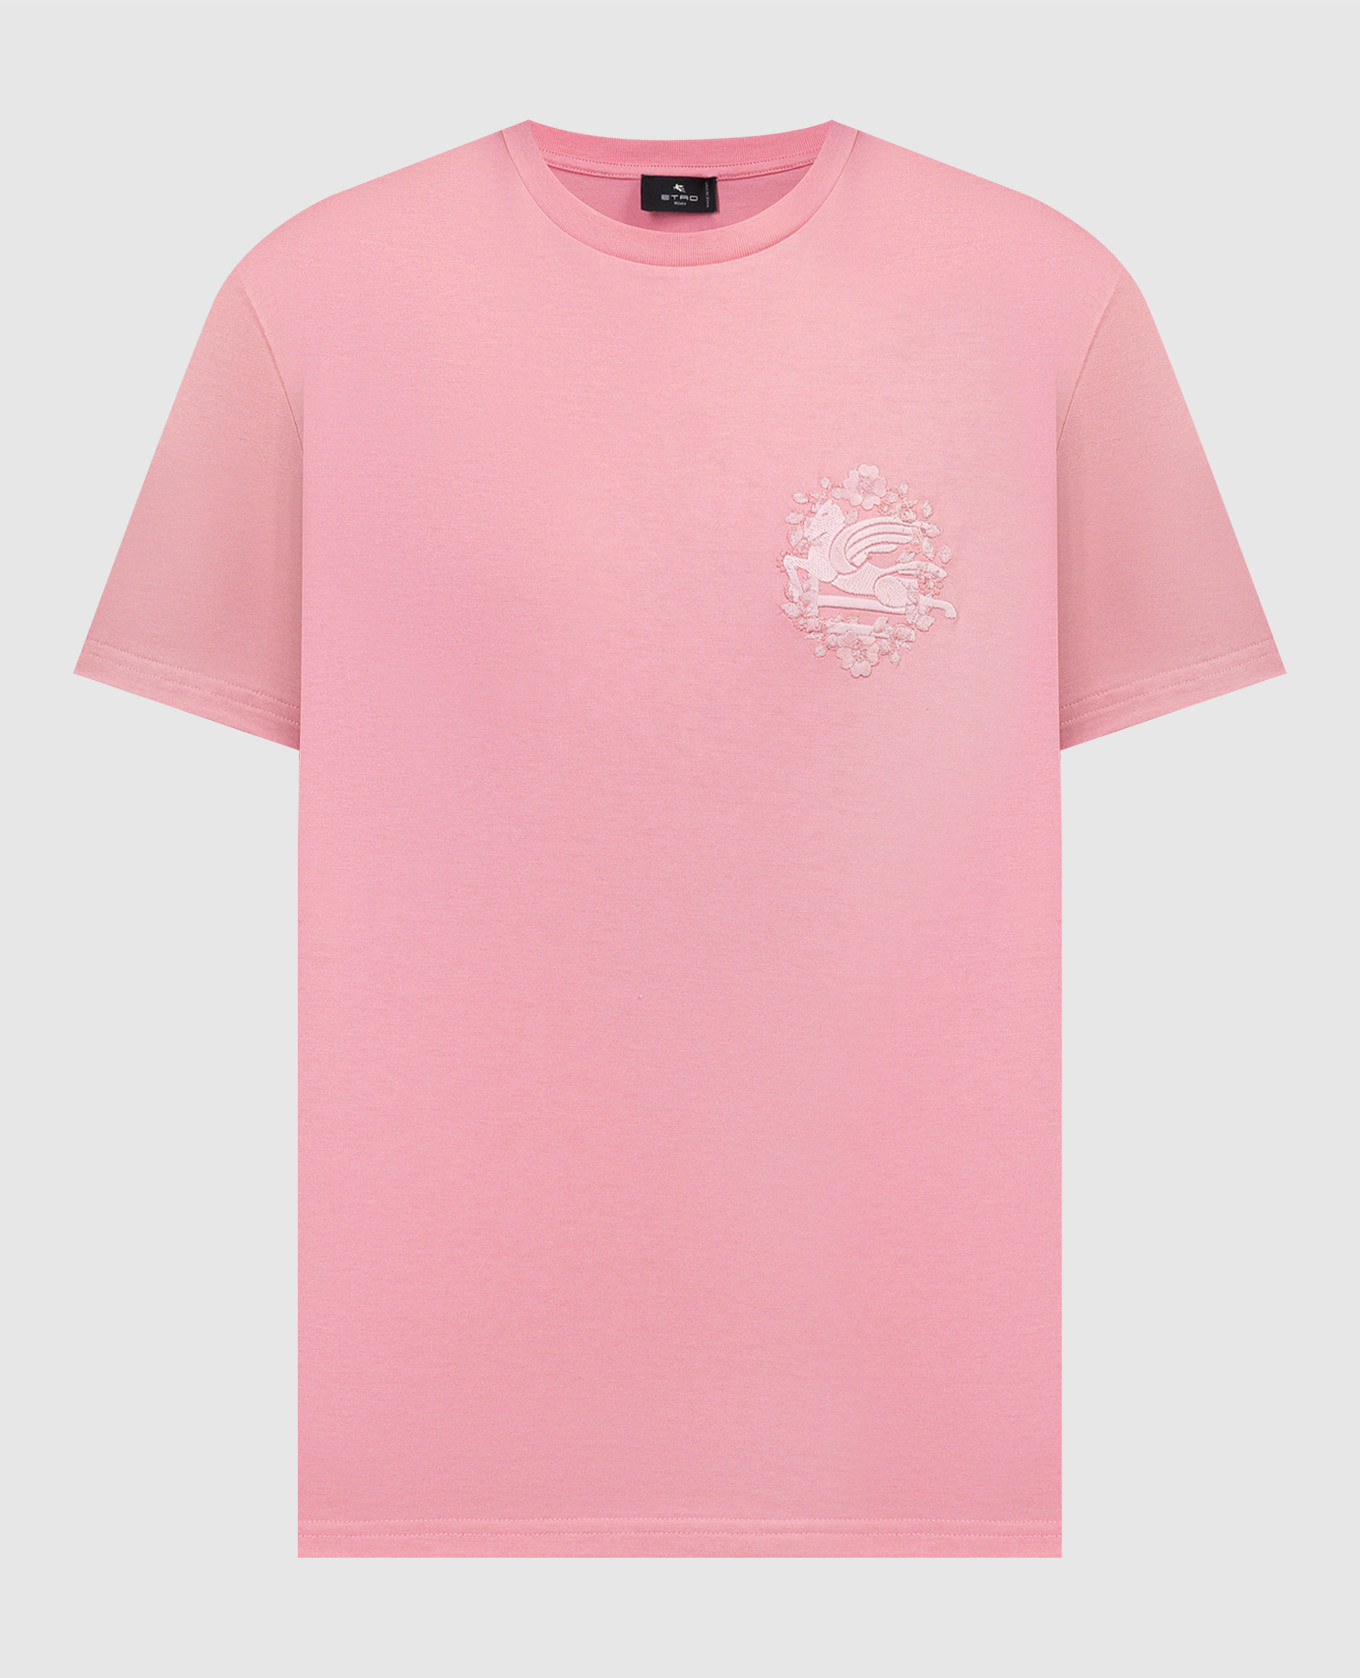 Pink t-shirt with Pegaso logo embroidery